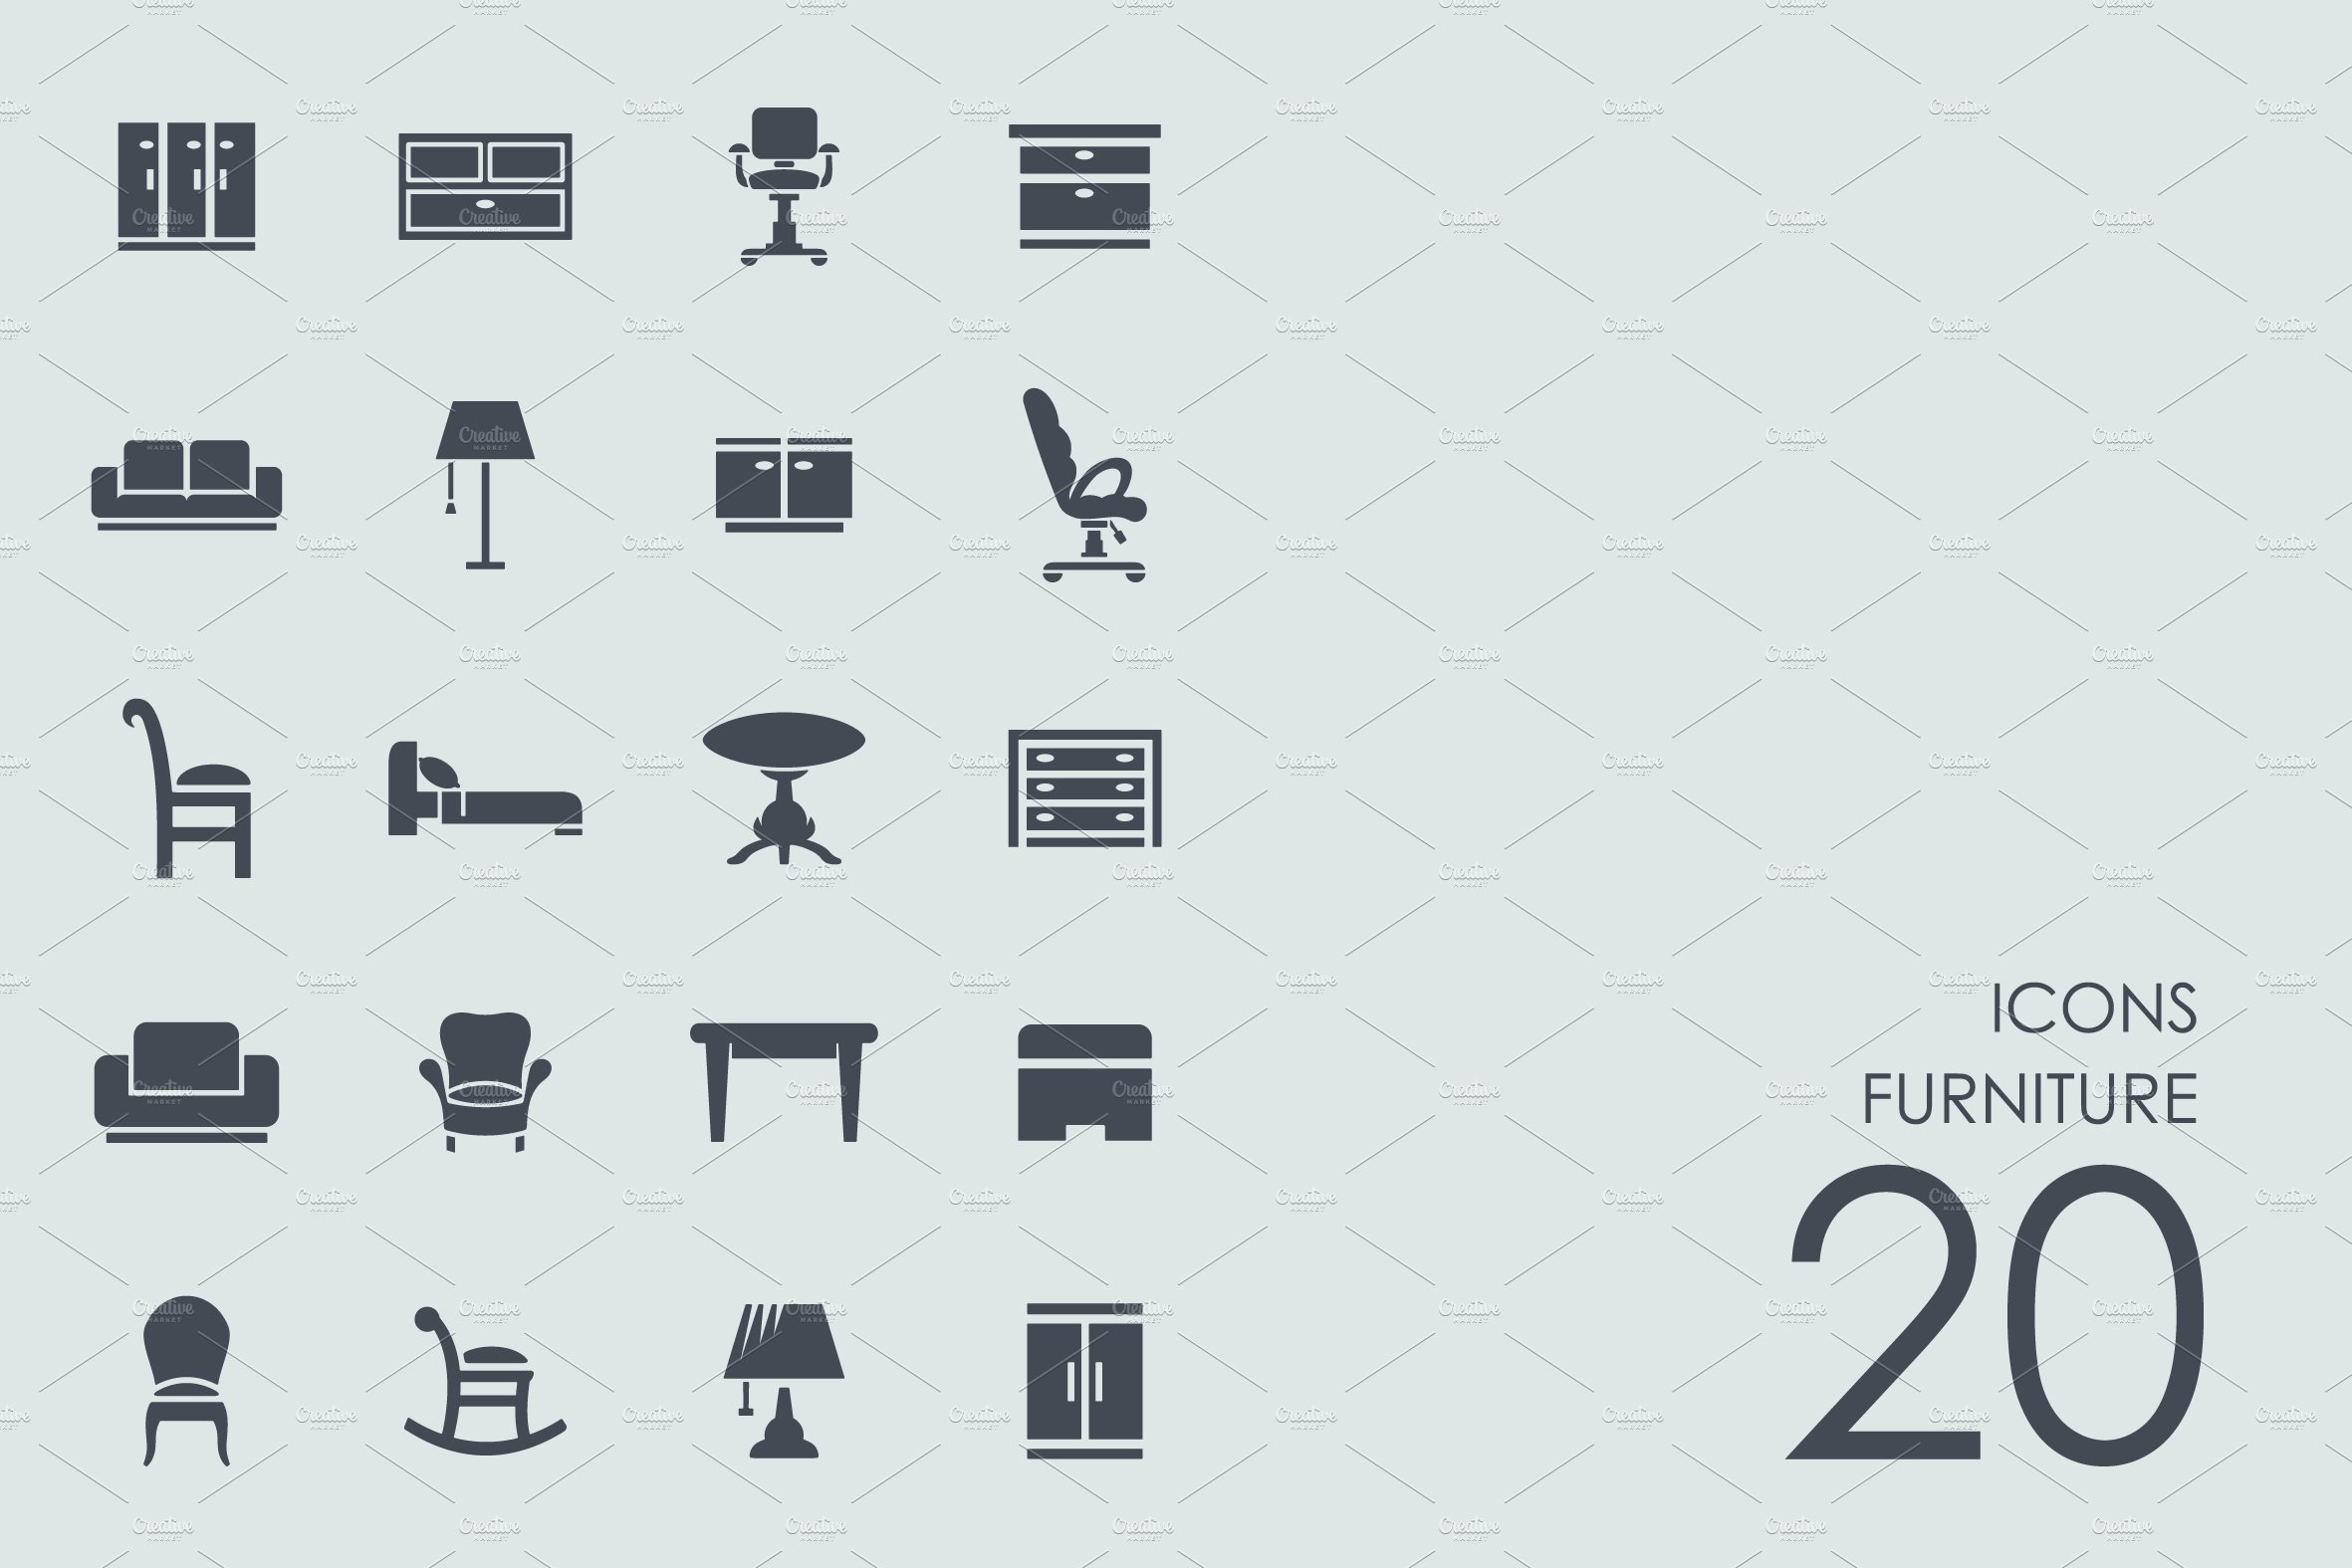 Furniture icons cover image.